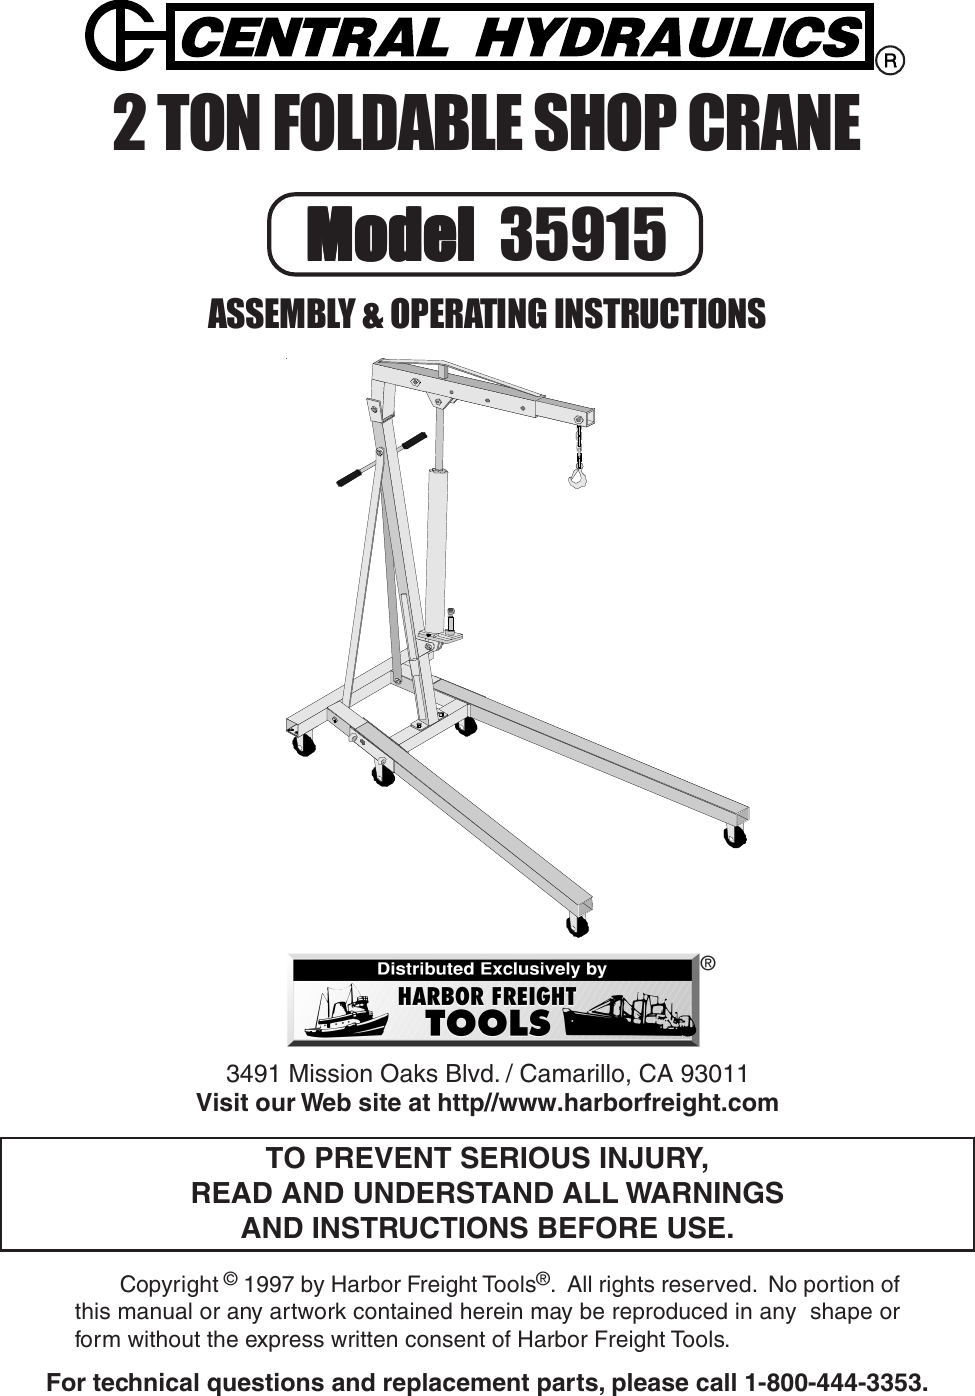 Page 1 of 11 - Central-Hydraulics Central-Hydraulics-2-Ton-Foldable-Shop-Crane-35915-Users-Manual- 35915 Jack Manual  Central-hydraulics-2-ton-foldable-shop-crane-35915-users-manual